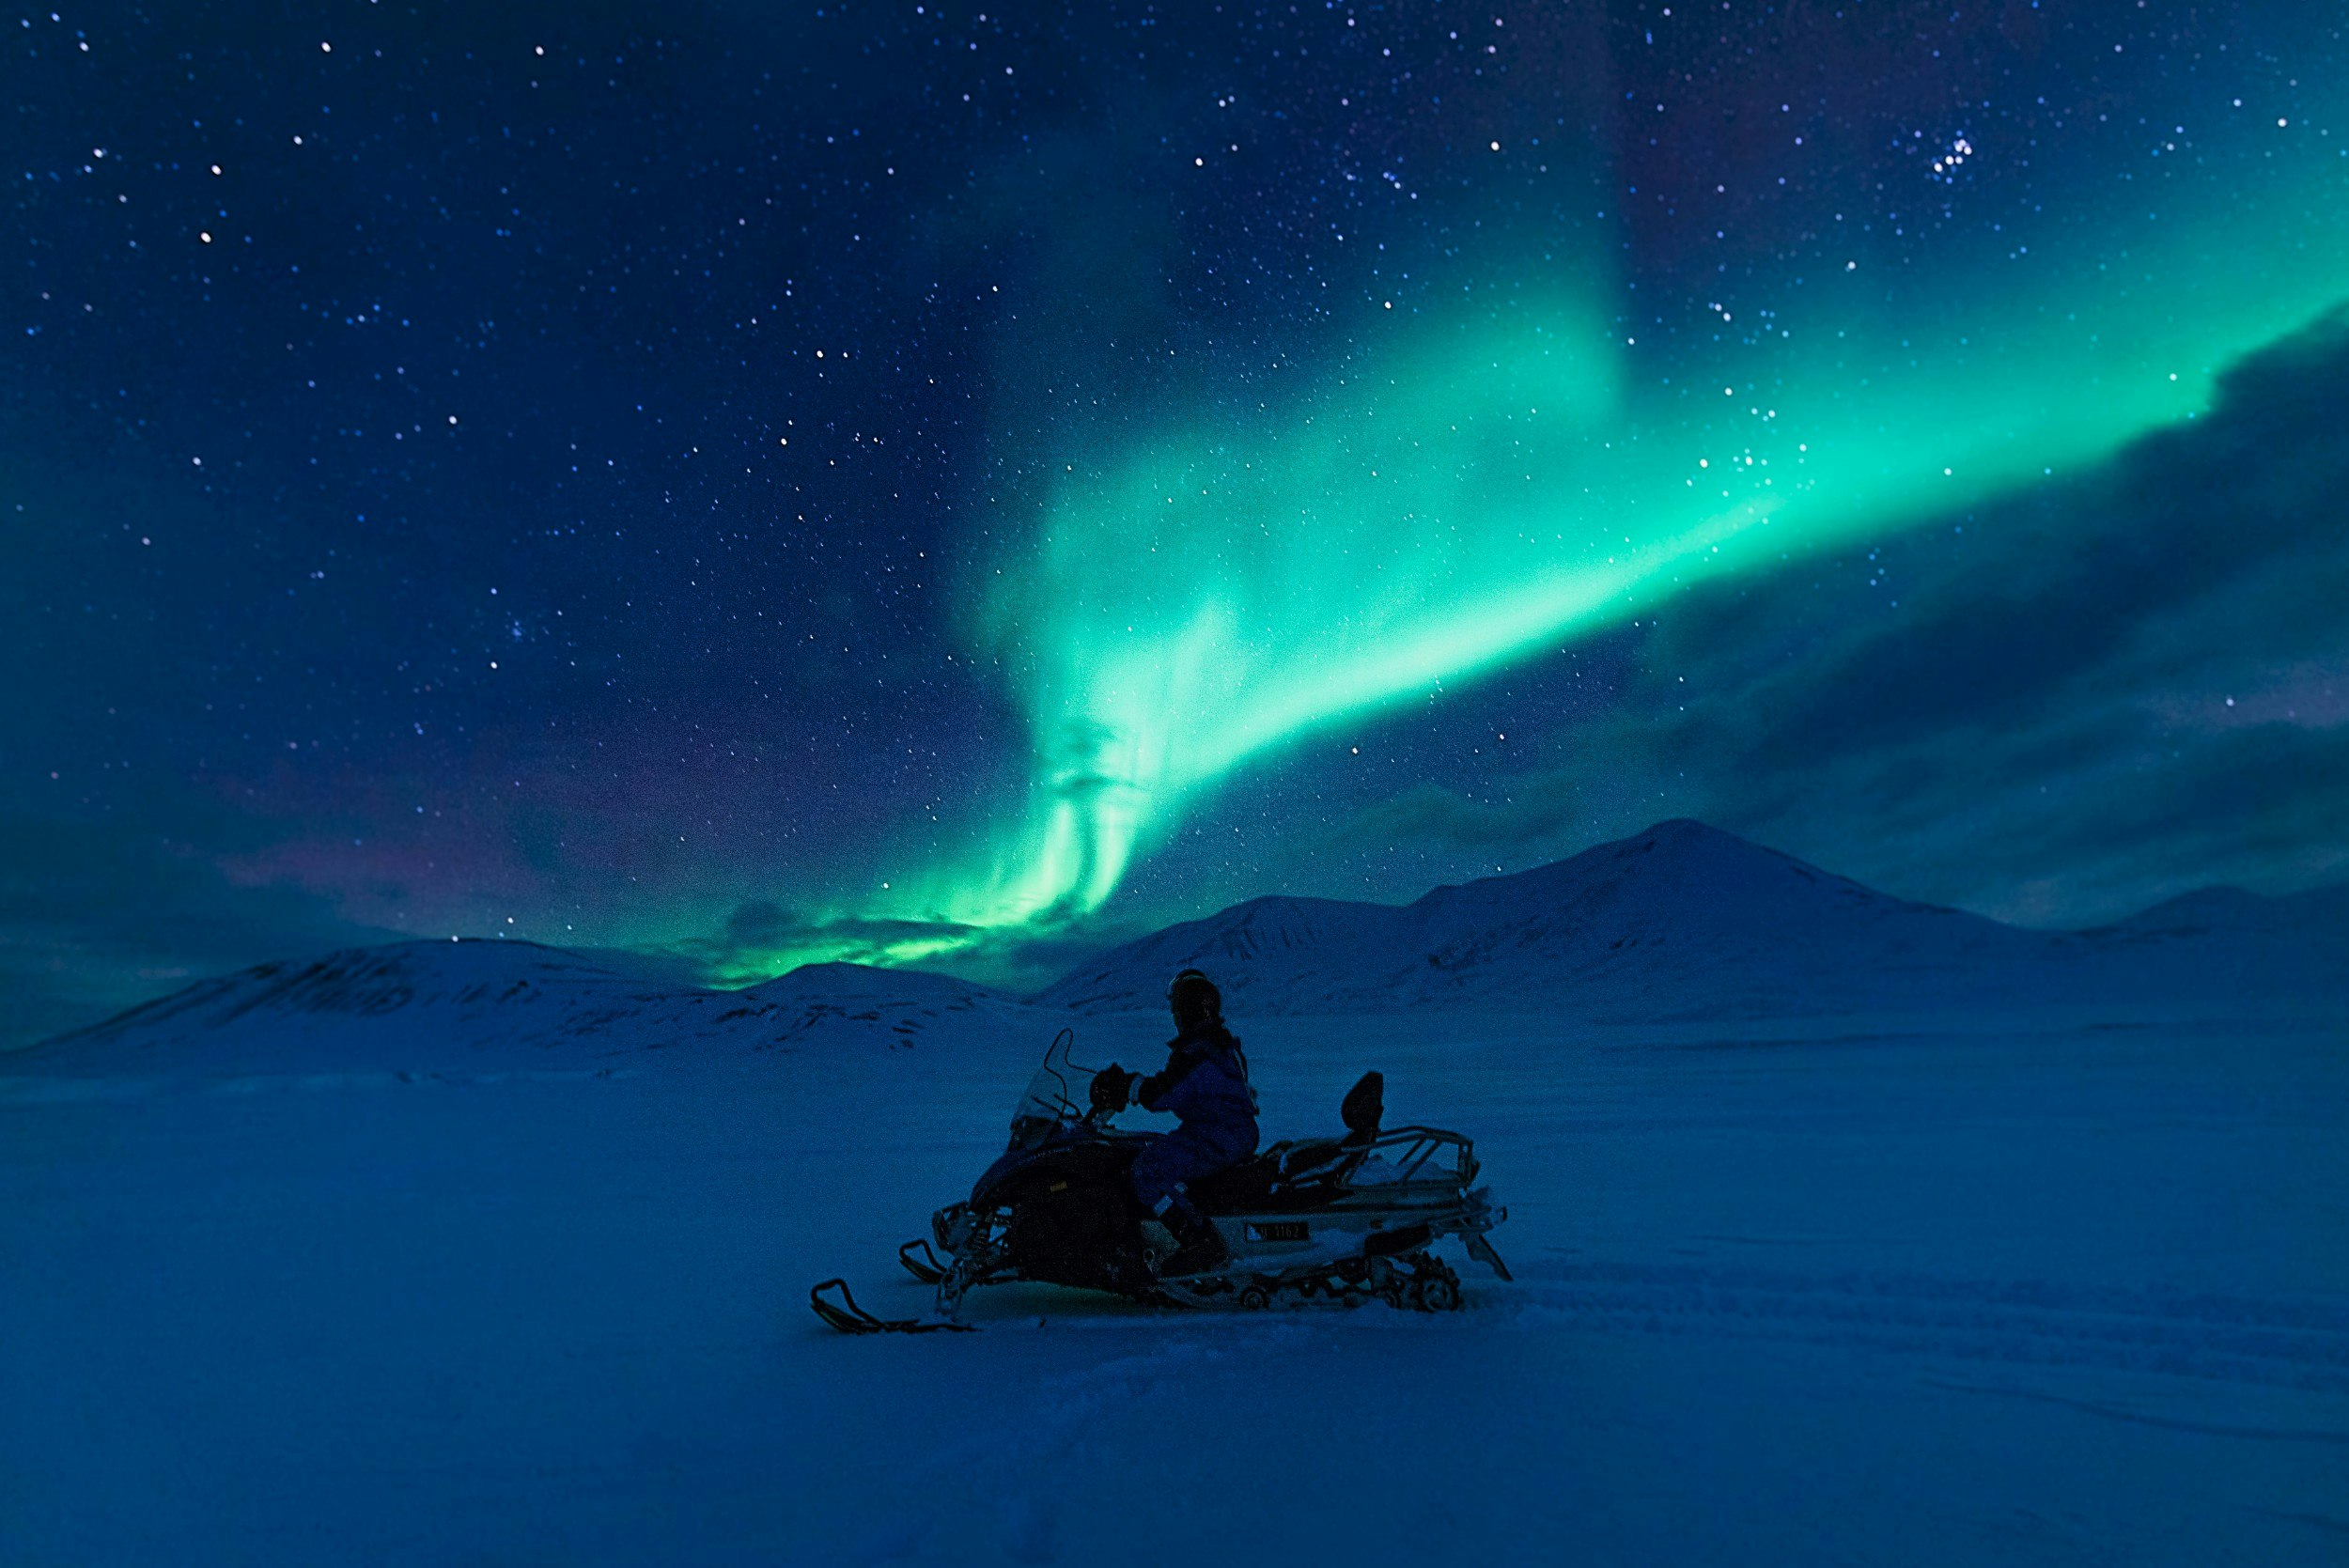 A person on an electric scooter with the Northern Lights in the background